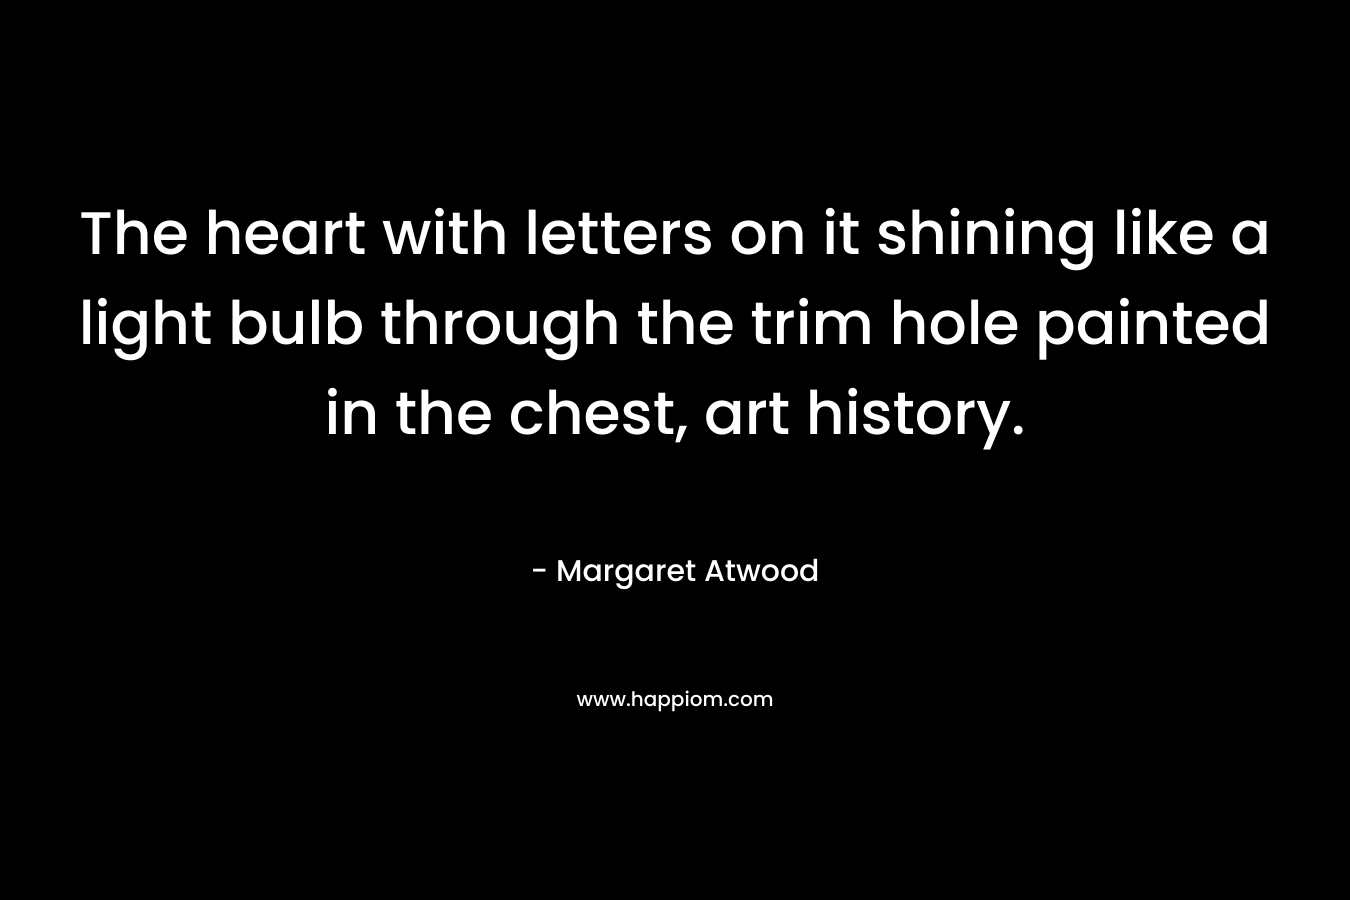 The heart with letters on it shining like a light bulb through the trim hole painted in the chest, art history. – Margaret Atwood